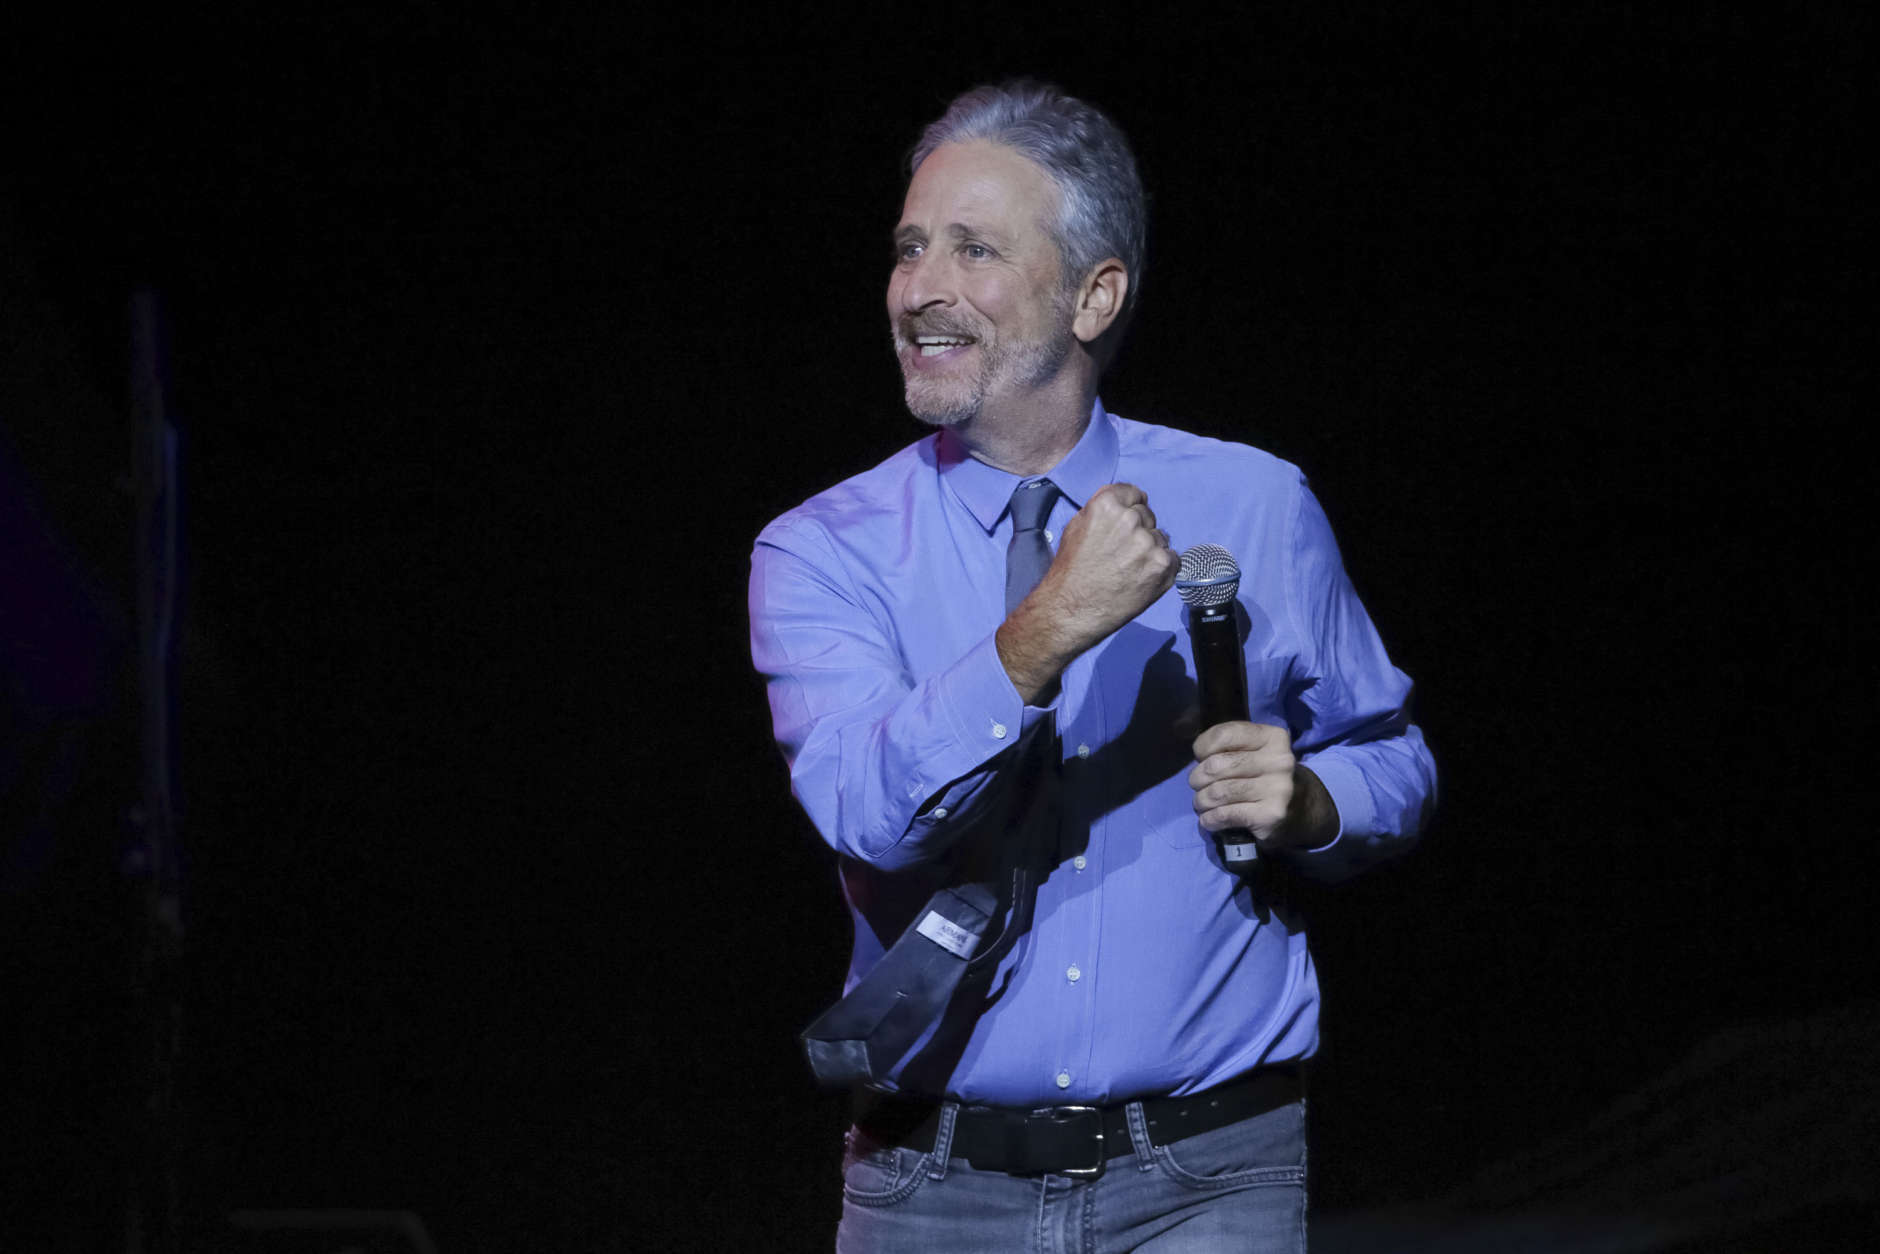 Comedian Jon Stewart performs on stage during the 11th Annual Stand Up for Heroes benefit, presented by the New York Comedy Festival and The Bob Woodruff Foundation, at the Theater at Madison Square Garden on Tuesday, Nov. 7, 2017, in New York. (Photo by Brent N. Clarke/Invision/AP)